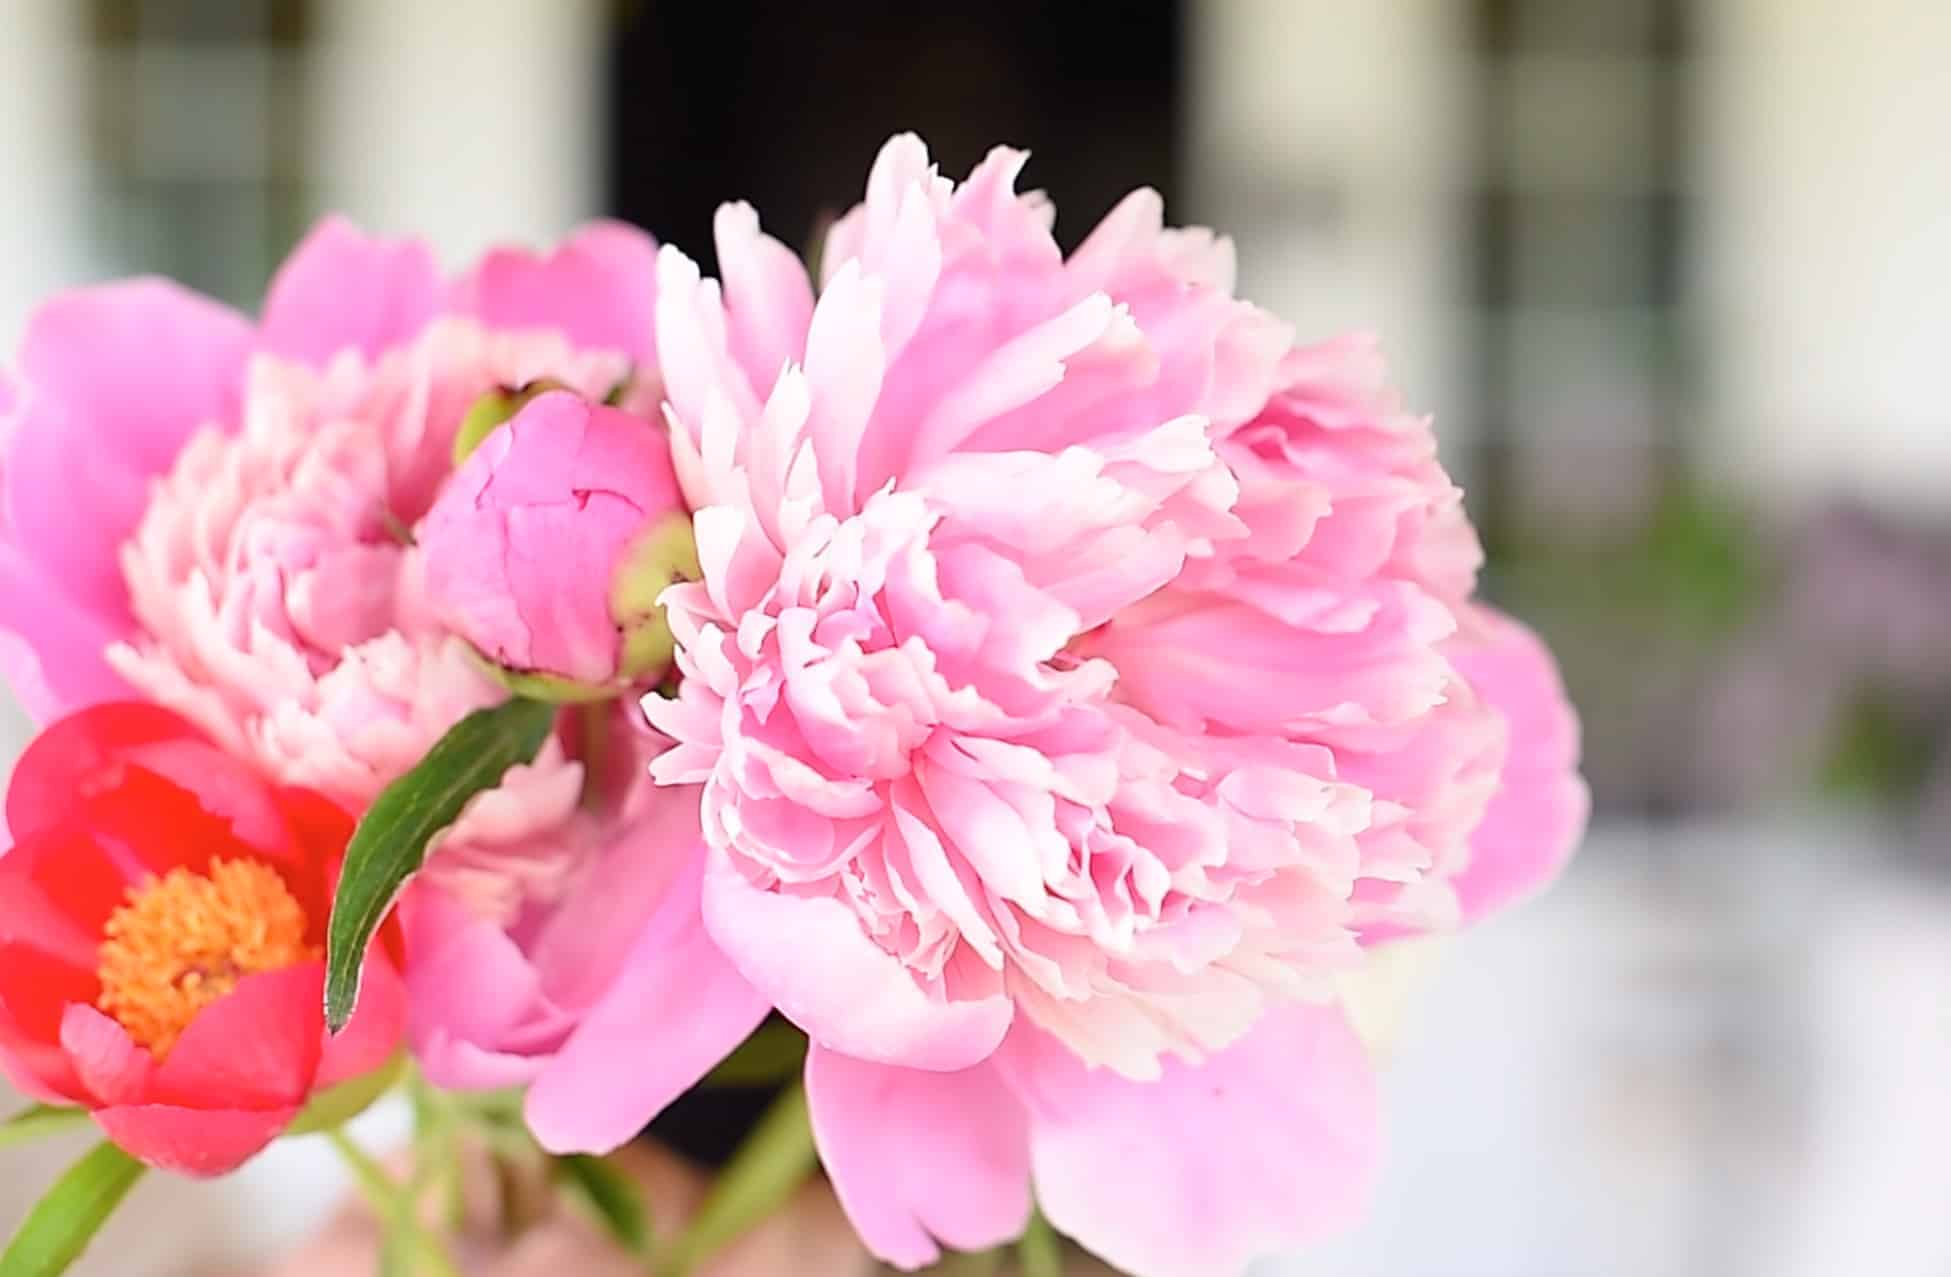 Growing peonies in your garden is a wonderful way to have beautiful cut flowers in the spring! Learn how to grow your own peonies with this simple guide!